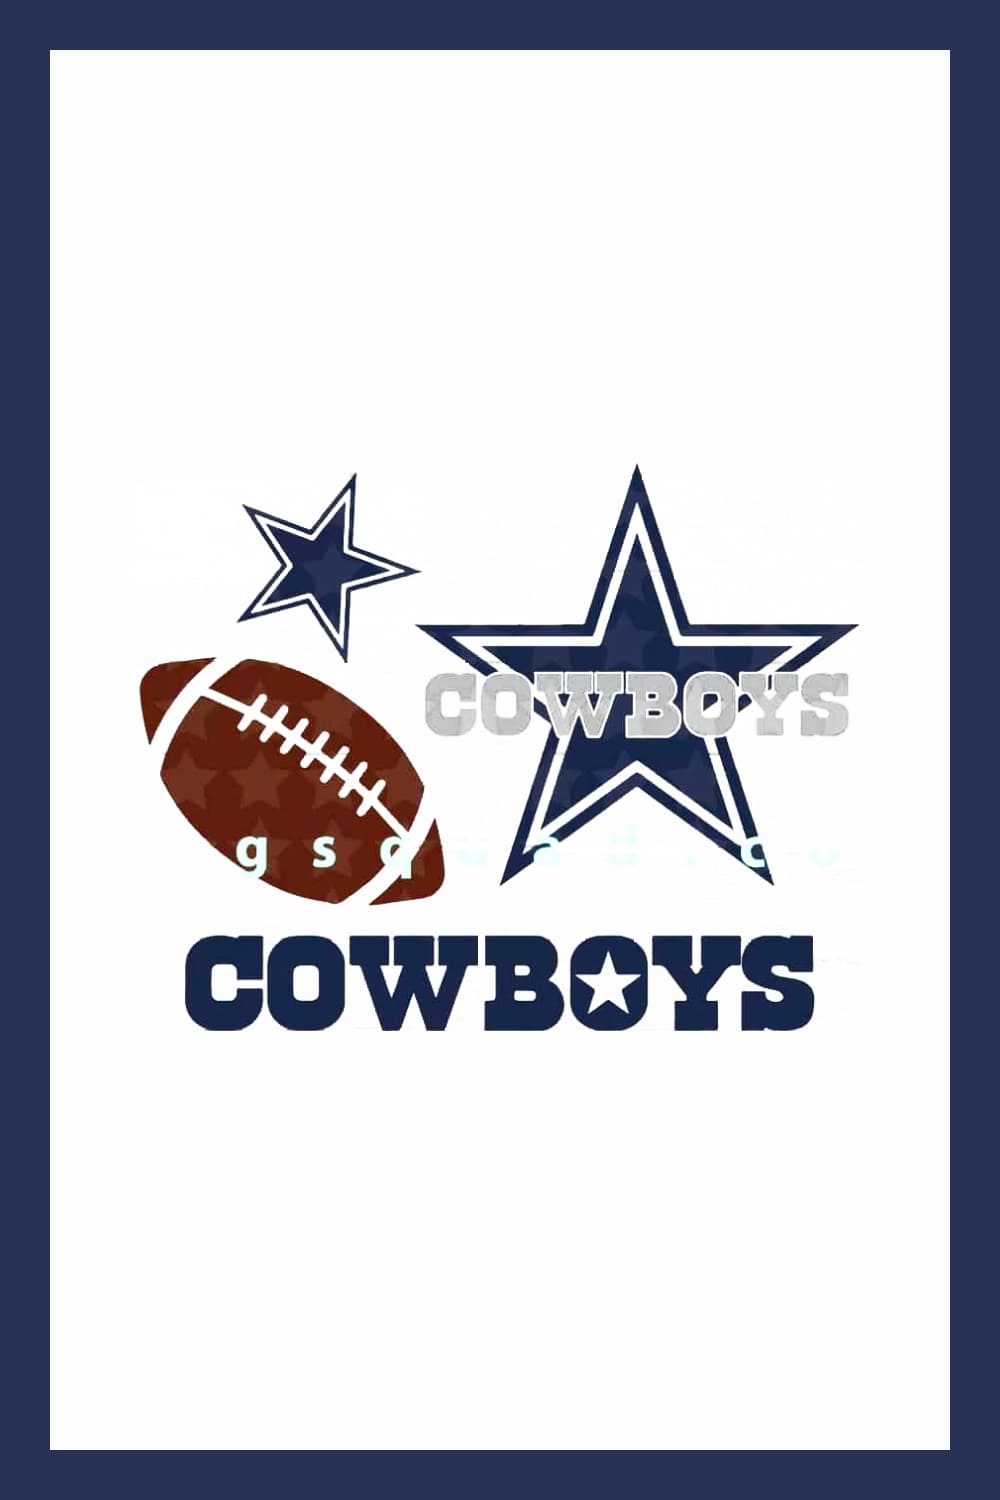 Collage of stars, balls and text Cowboys.